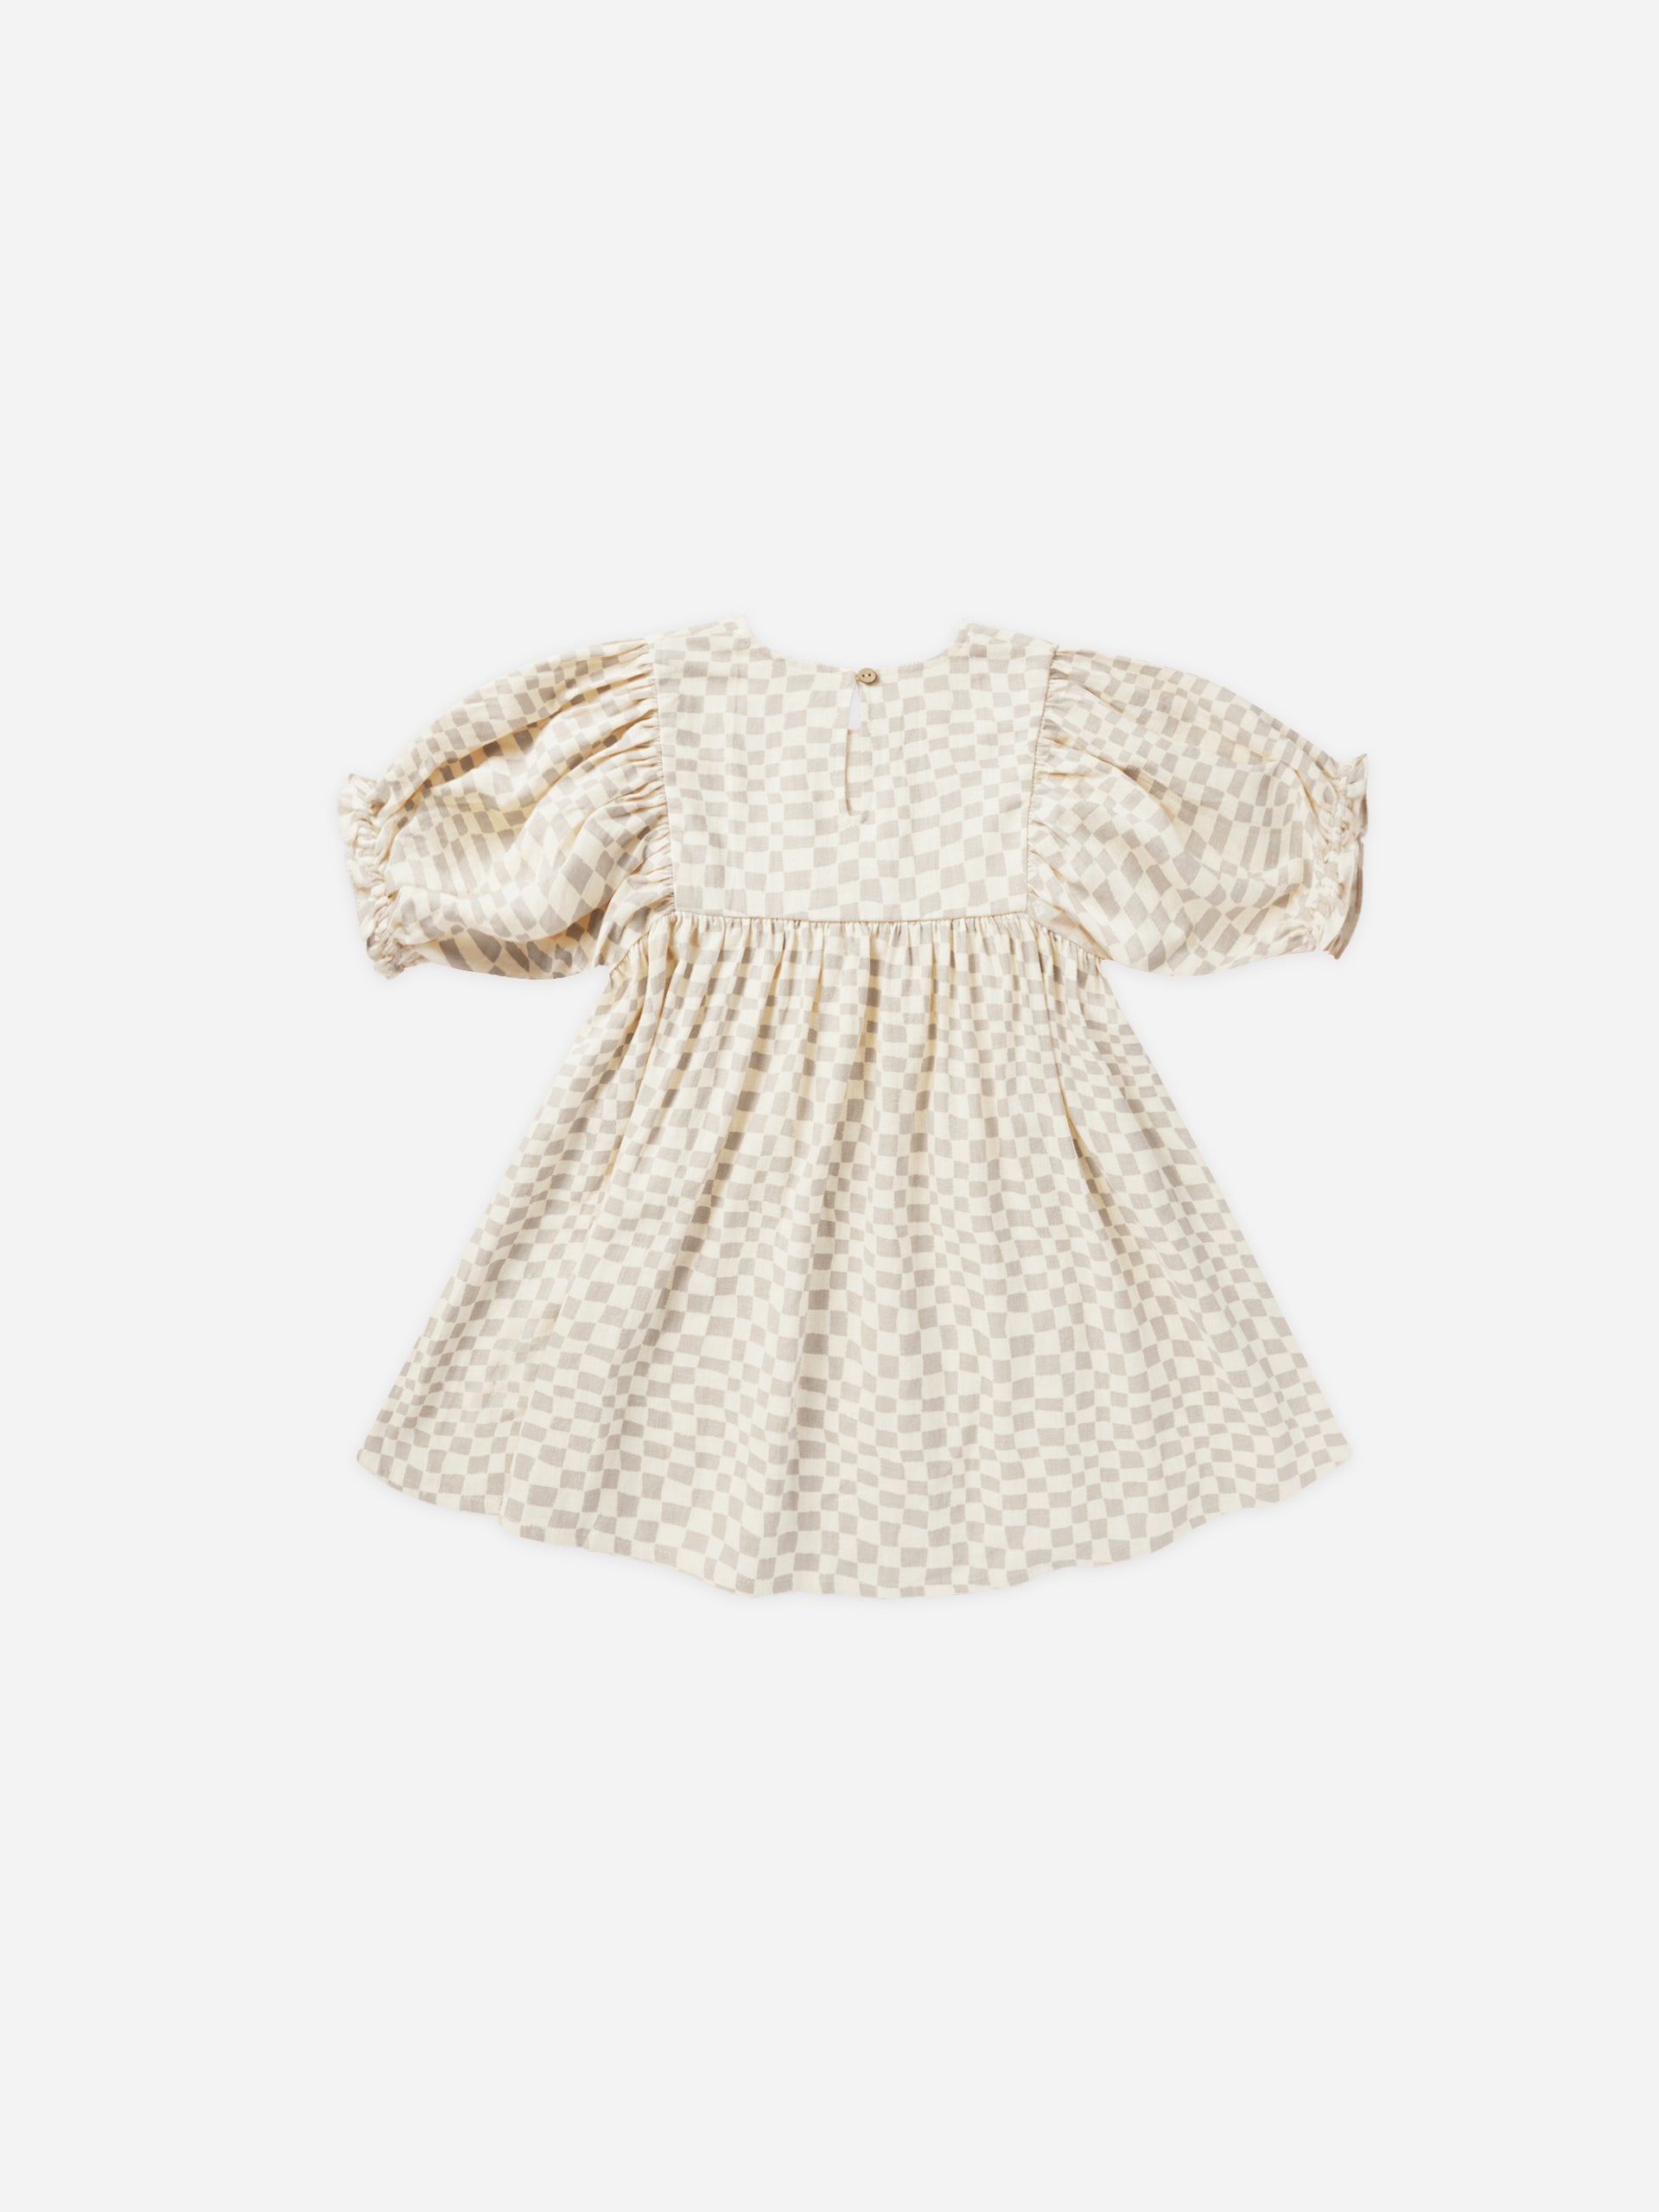 Jolene Dress || Dove Check - Rylee + Cru | Kids Clothes | Trendy Baby Clothes | Modern Infant Outfits |